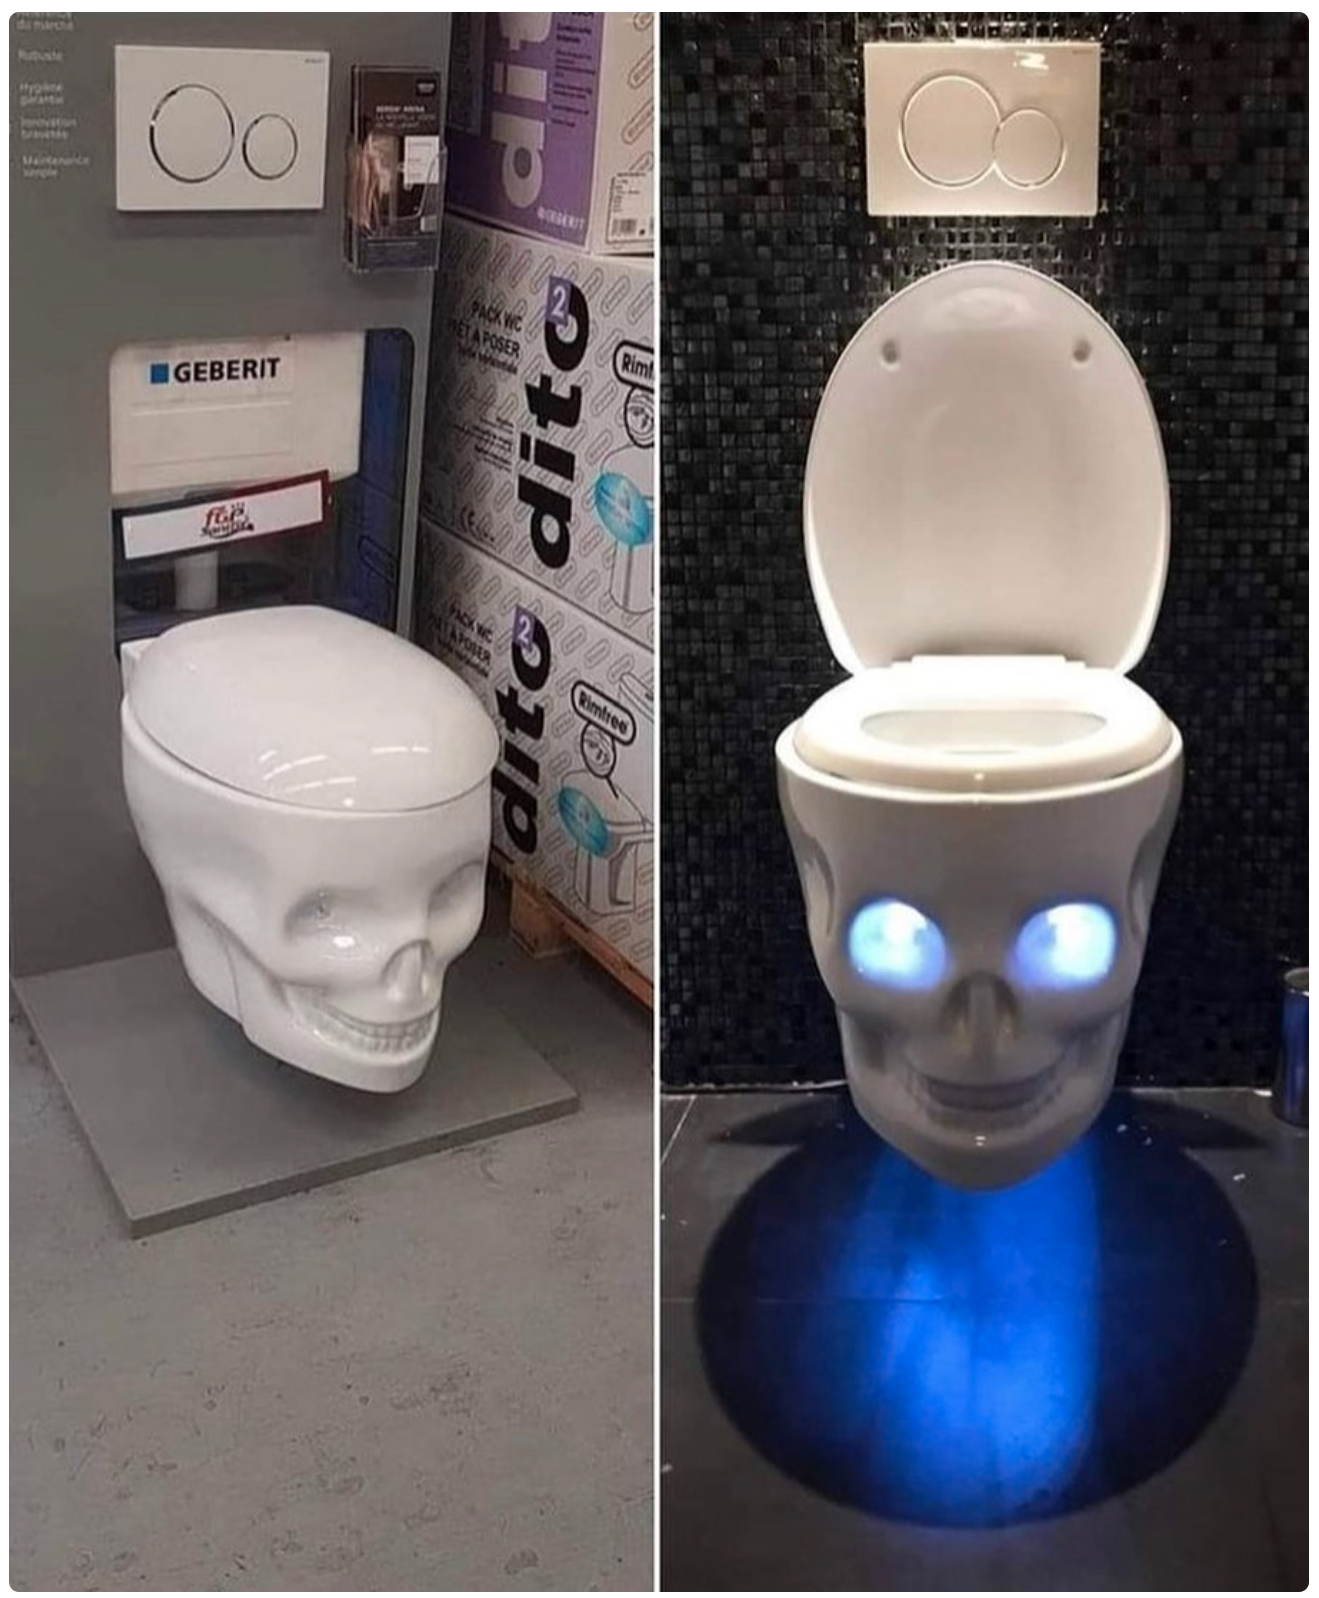 The flush of your nightmares.